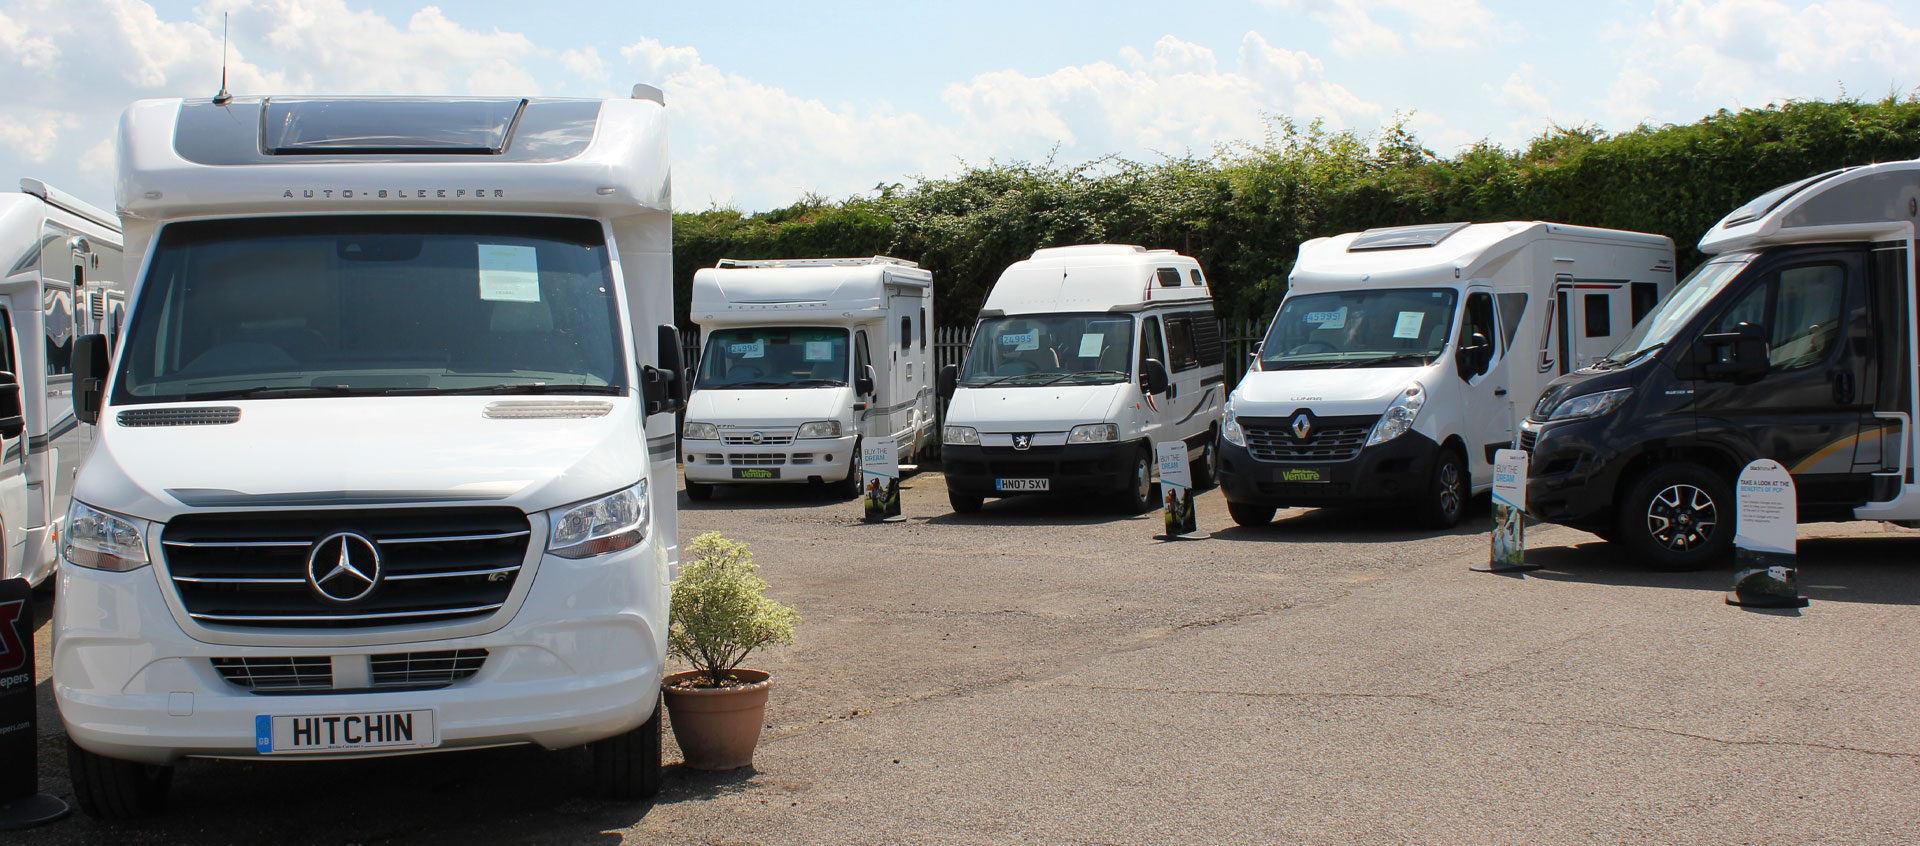 Hitchin Motorhomes new and used